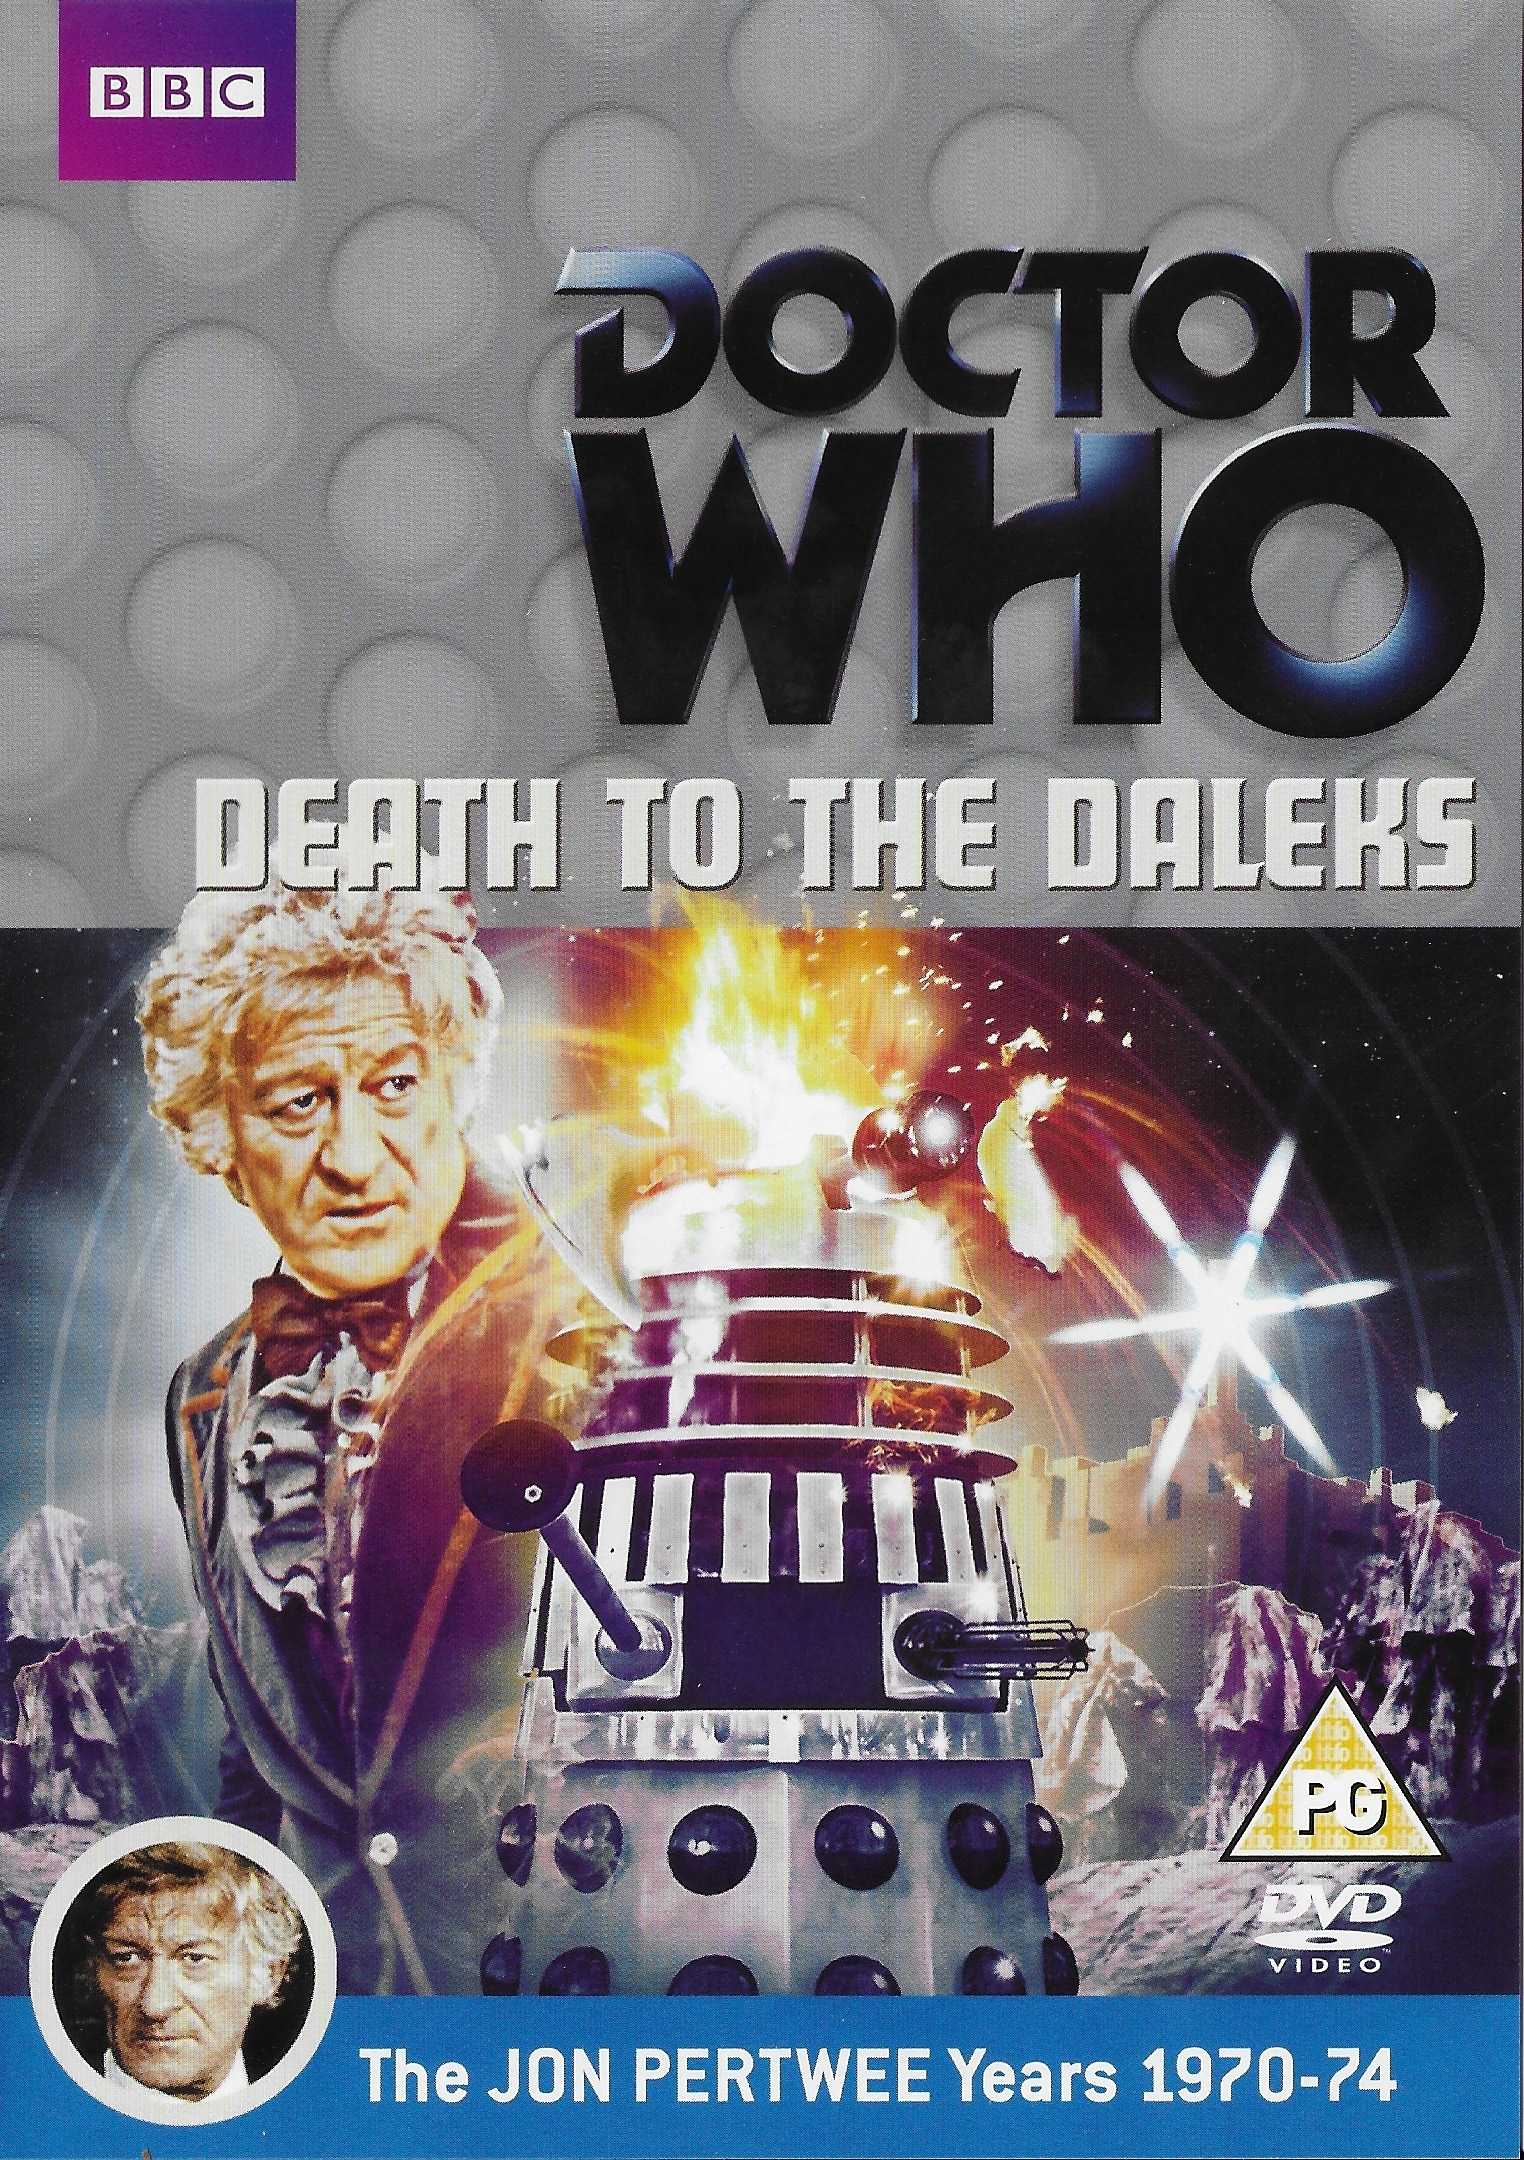 Picture of BBCDVD 3483 Doctor Who - Death to the Daleks by artist Terry Nation from the BBC dvds - Records and Tapes library